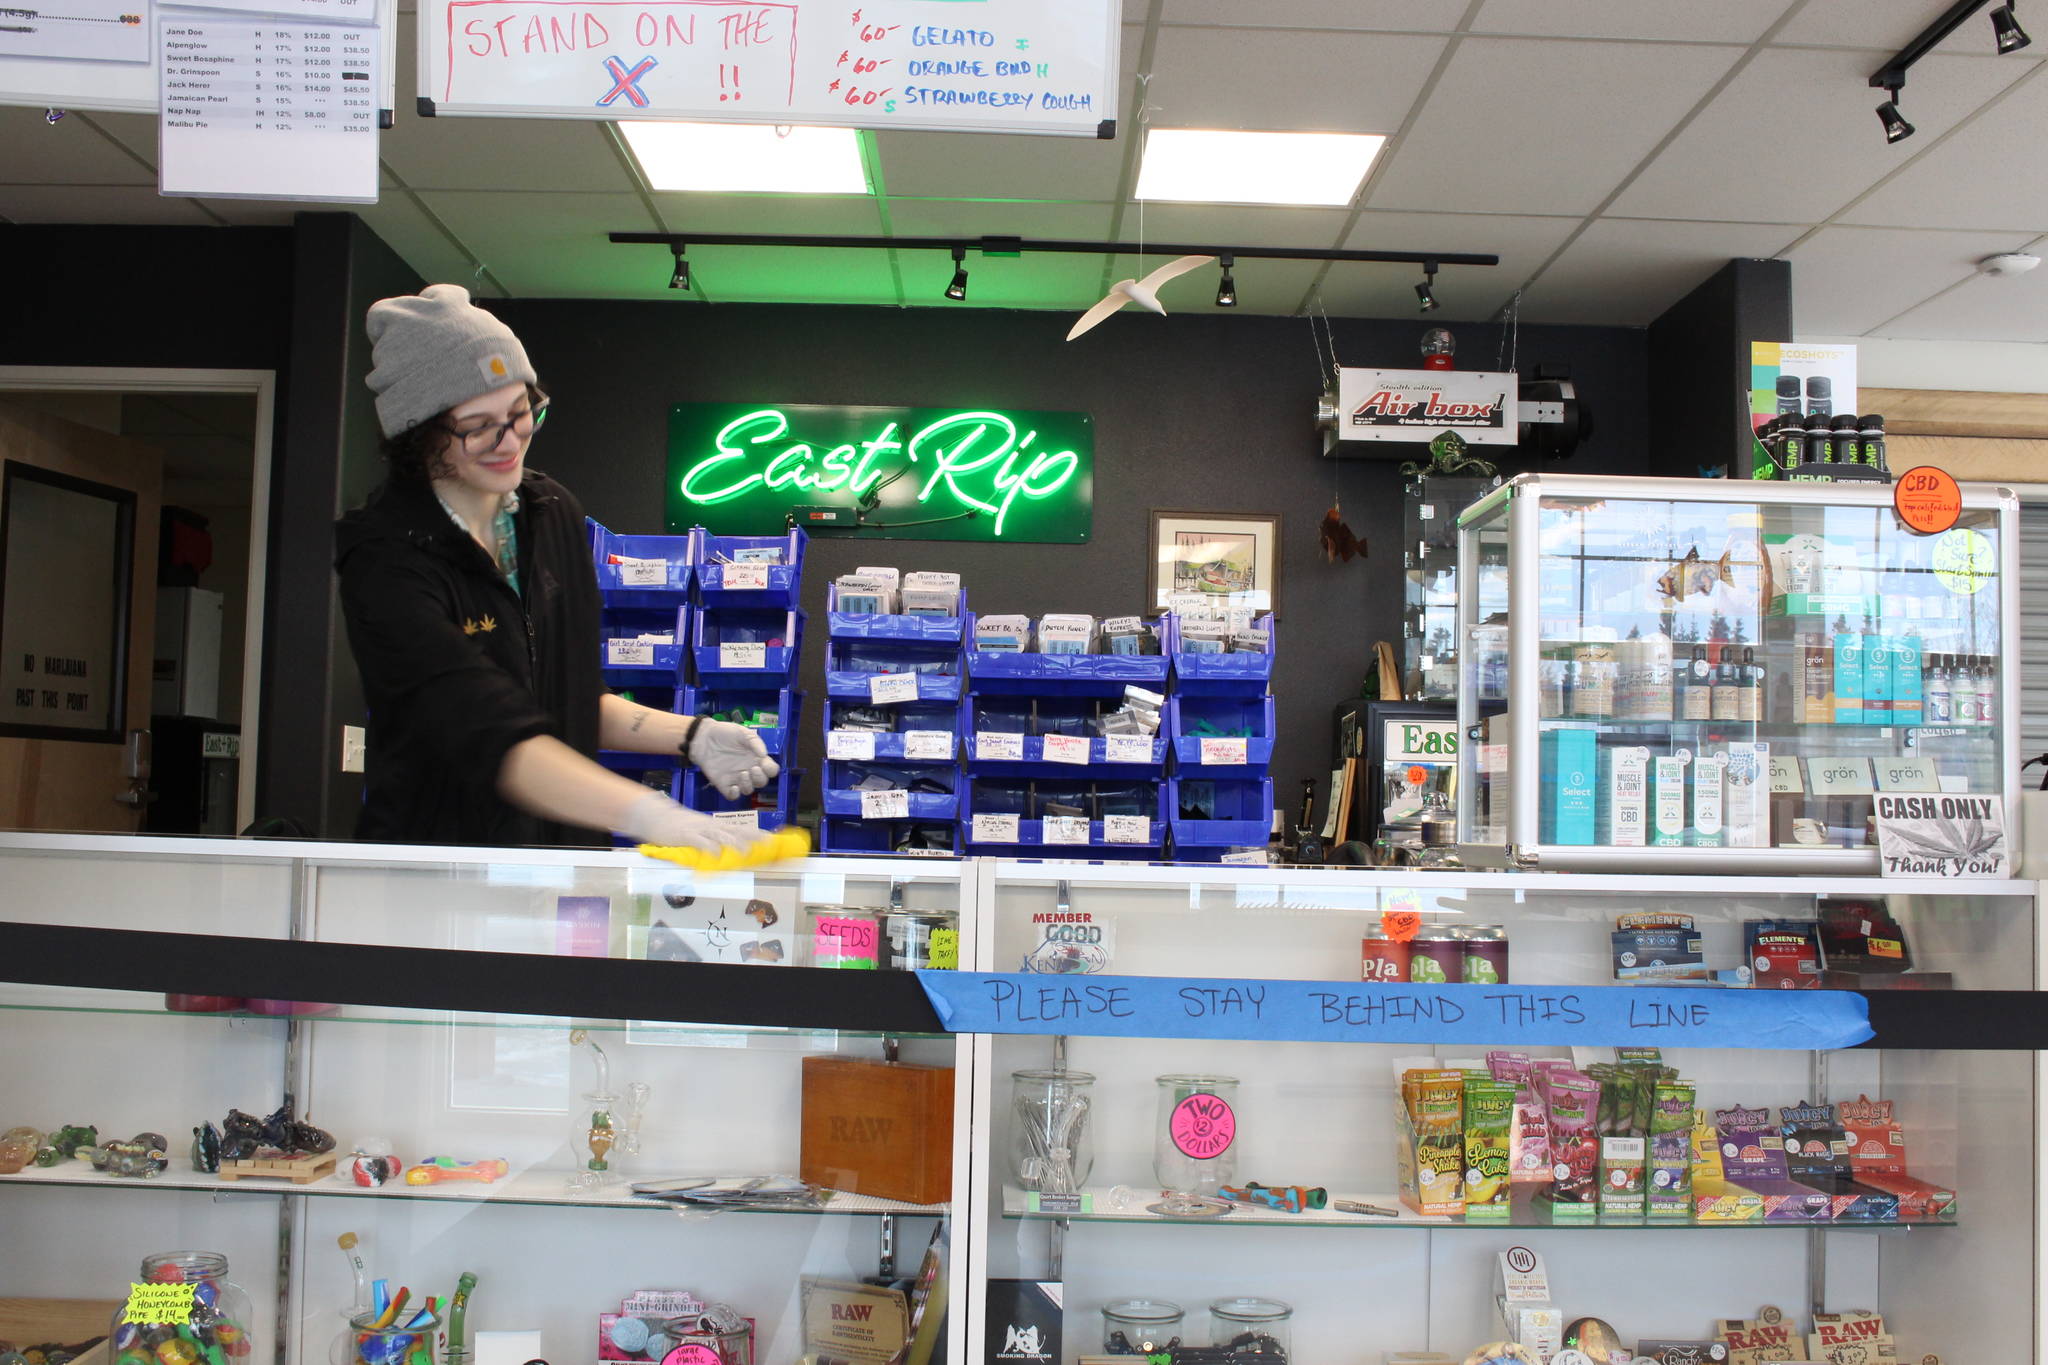 Mariah Schloeman wipes down the counter at East Rip in Kenai on Wednesday. The store has implemented more stringent cleaning protocols, including wiping down surfaces after every transaction, in the wake of the coronavirus pandemic. (Photo by Brian Mazurek/Peninsula Clarion)